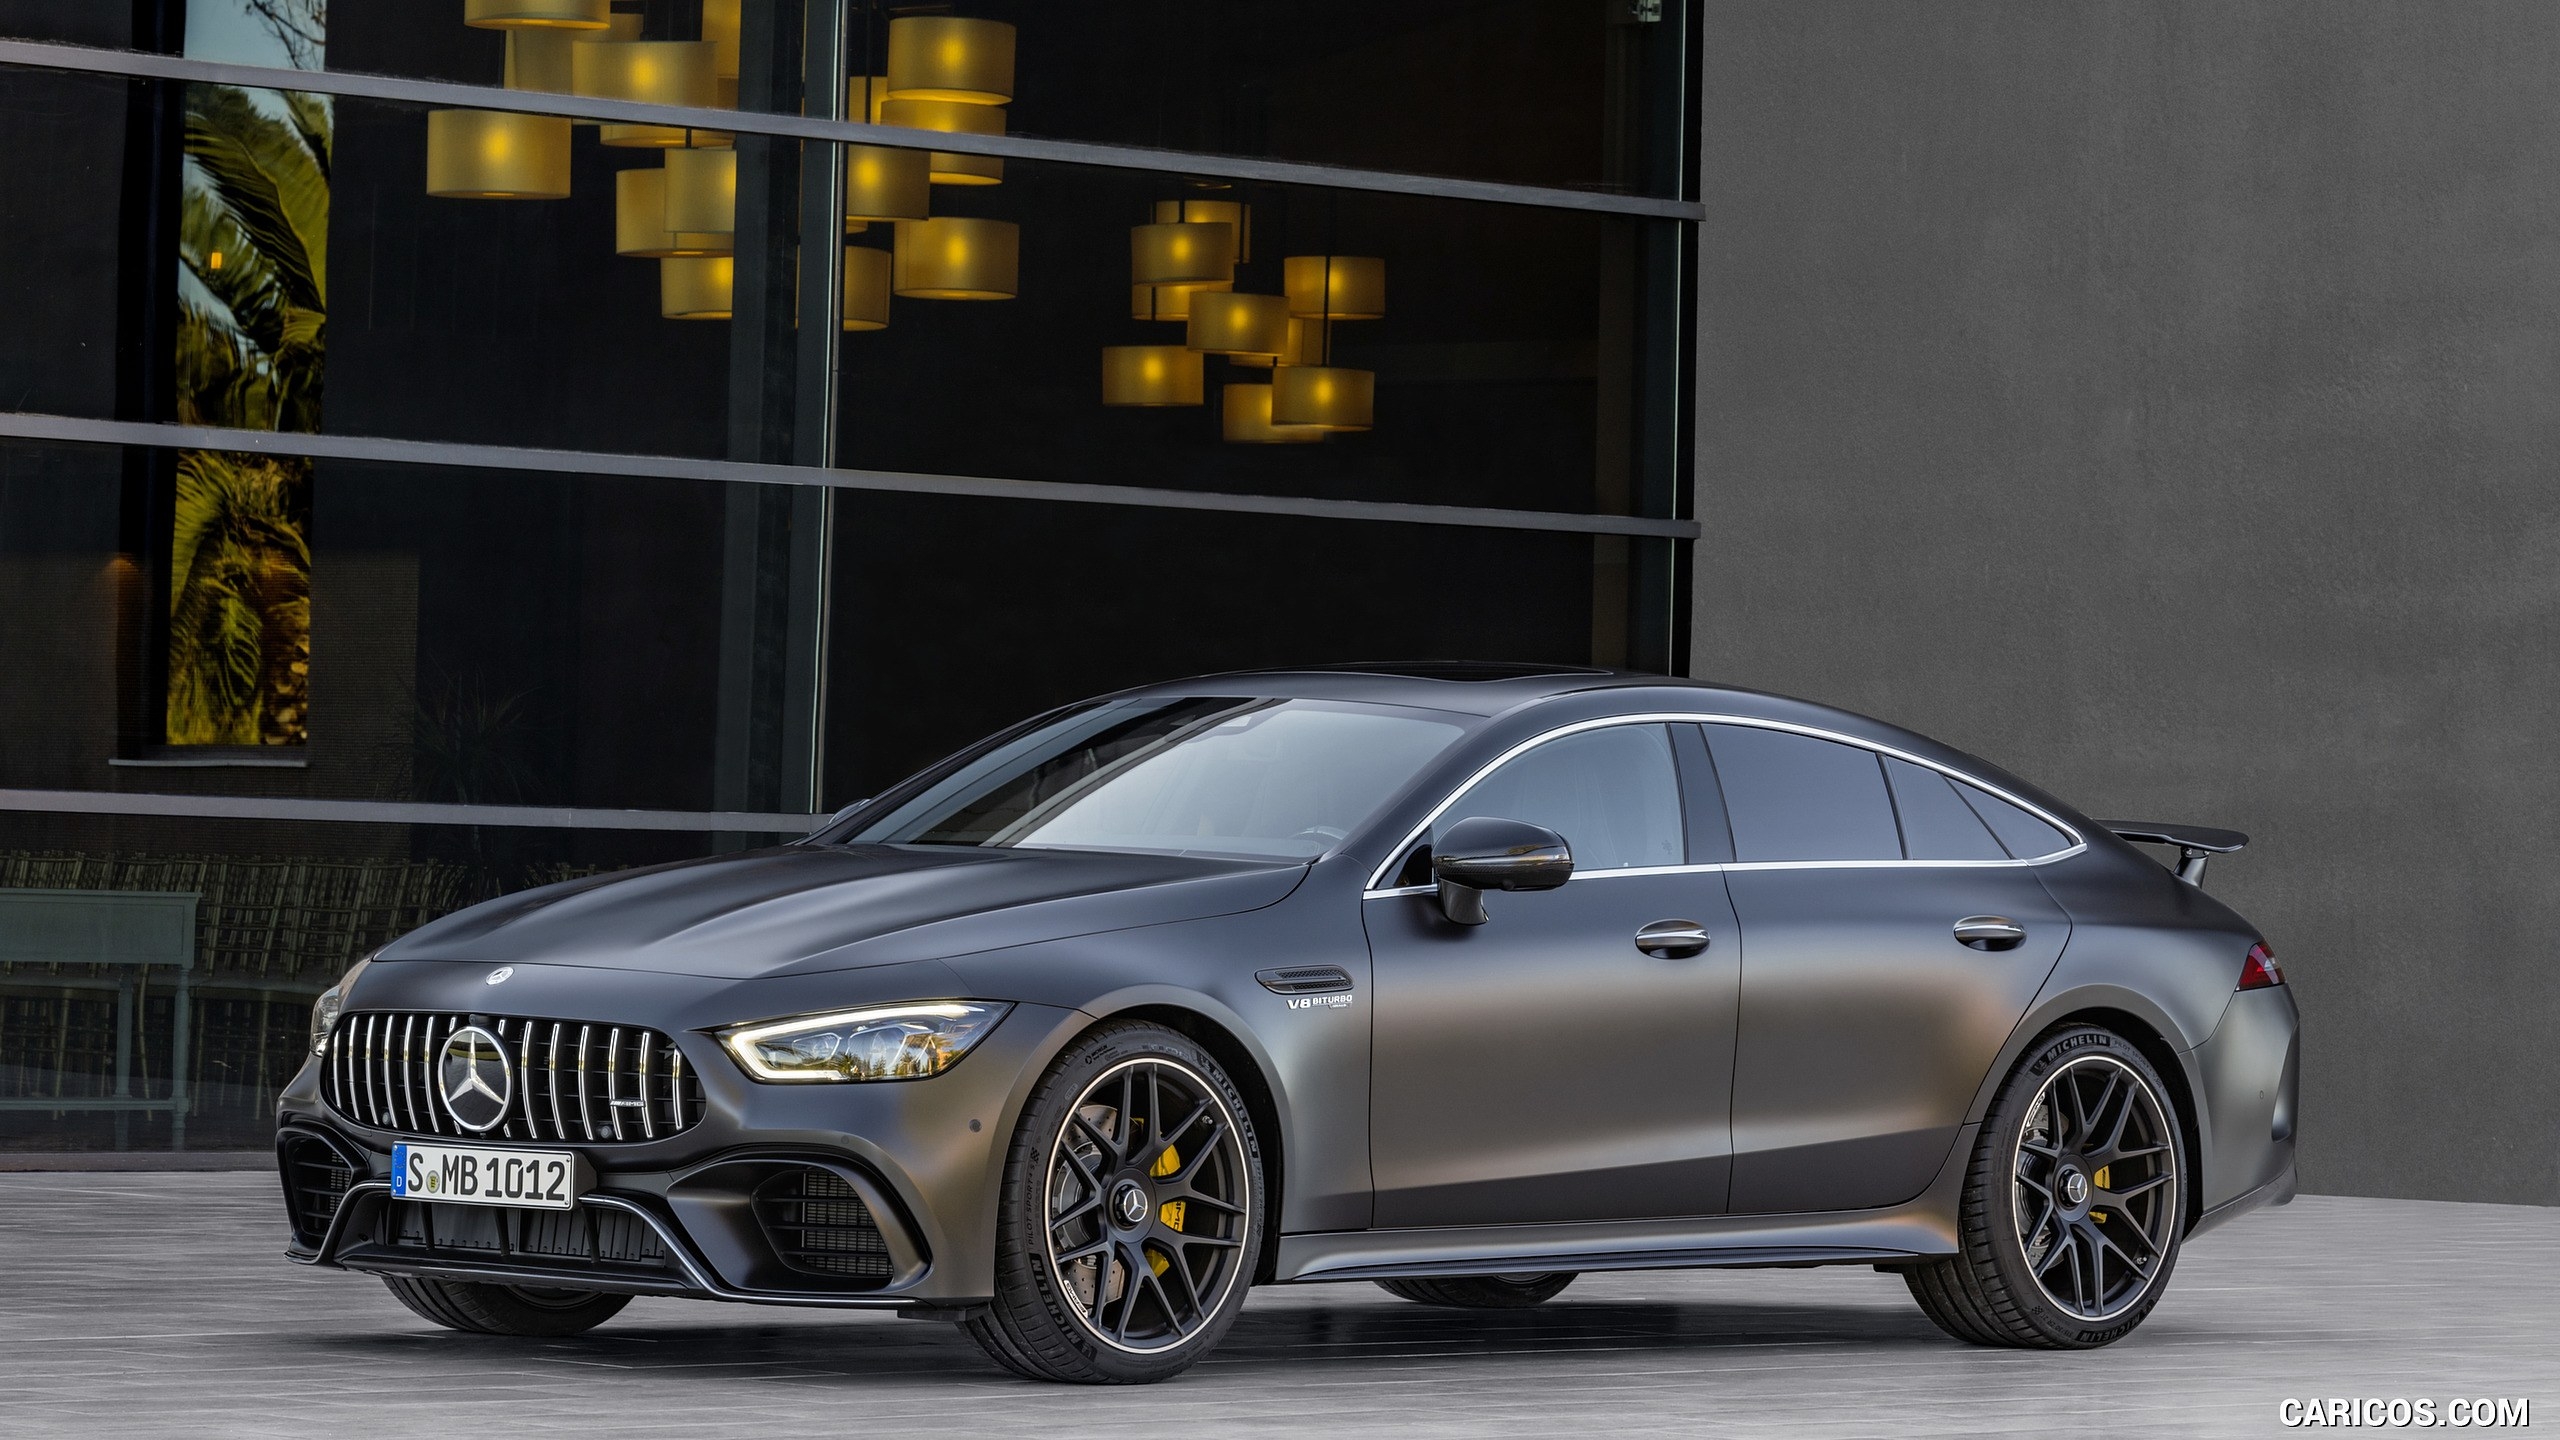 Mercedes Amg Gt 63 S 4Matic+ 4 Door Coupe Color